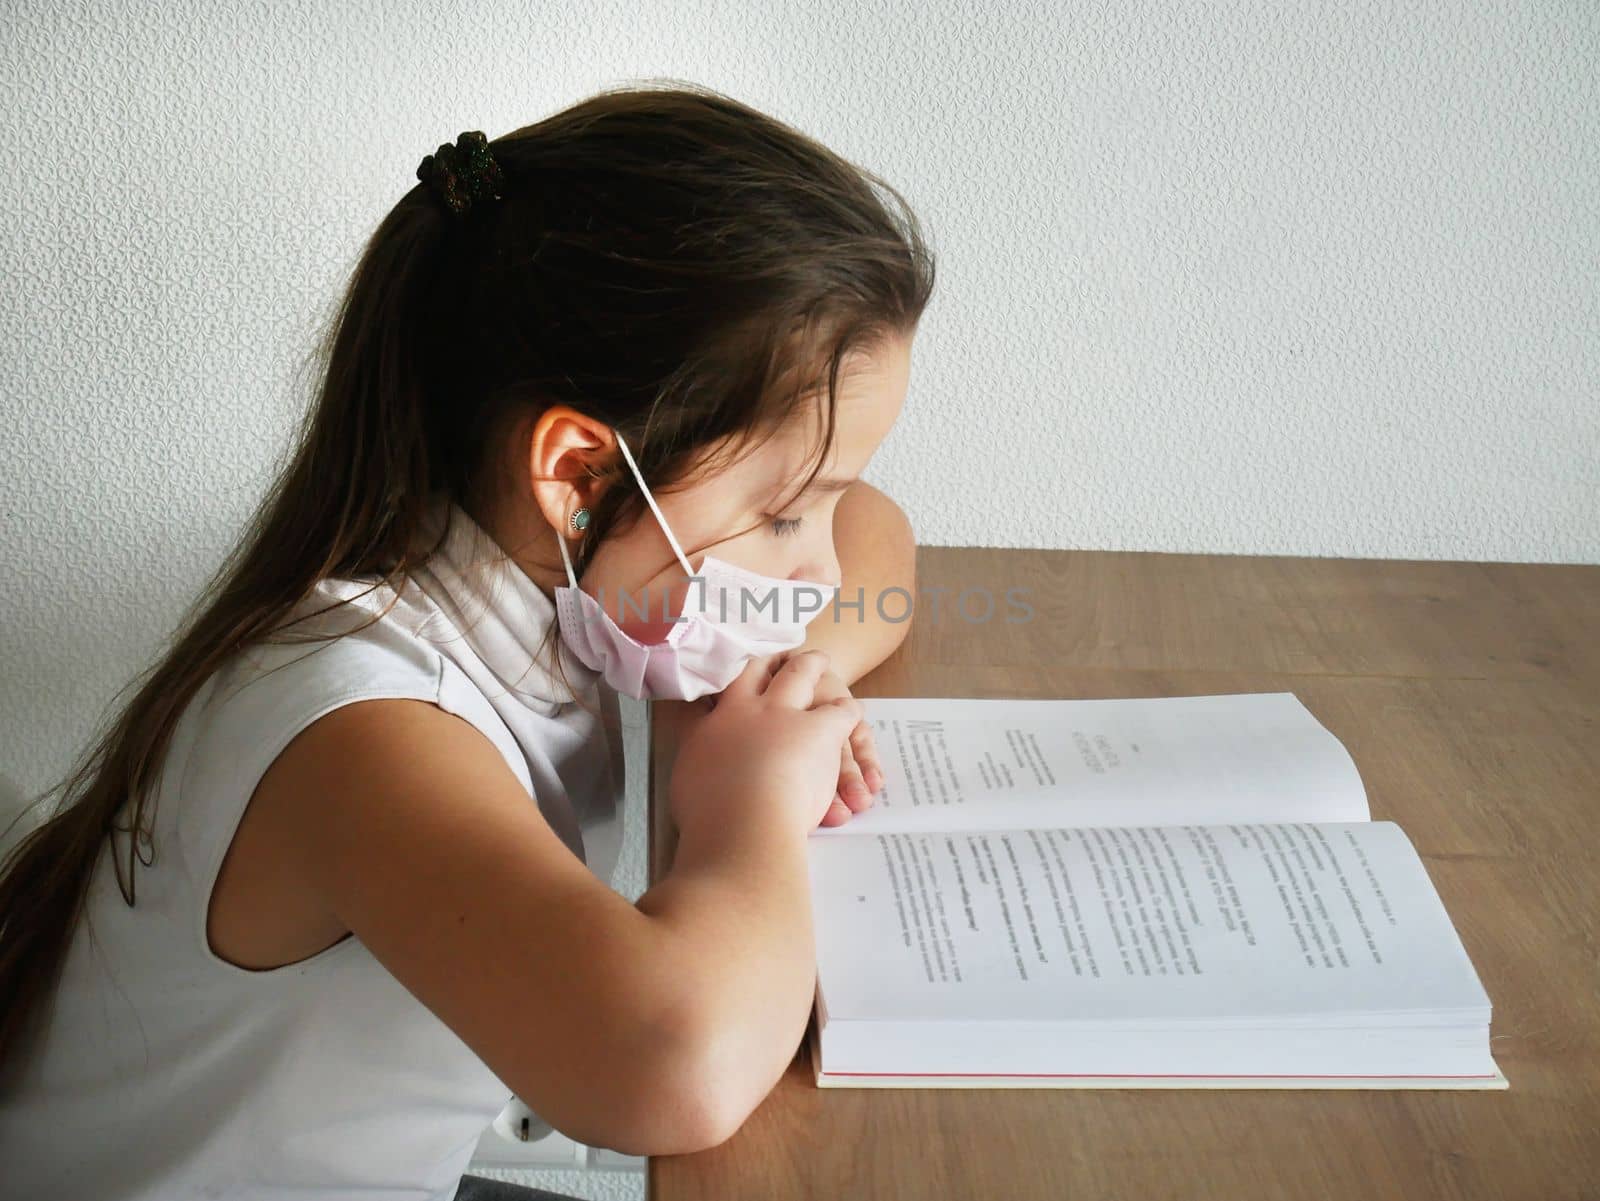 A girl reads a book at home with a medical mask on her face and doing school homework during the Covid-19 pandemic. a protective mask on the girl's face from the corona virus by Jyliana